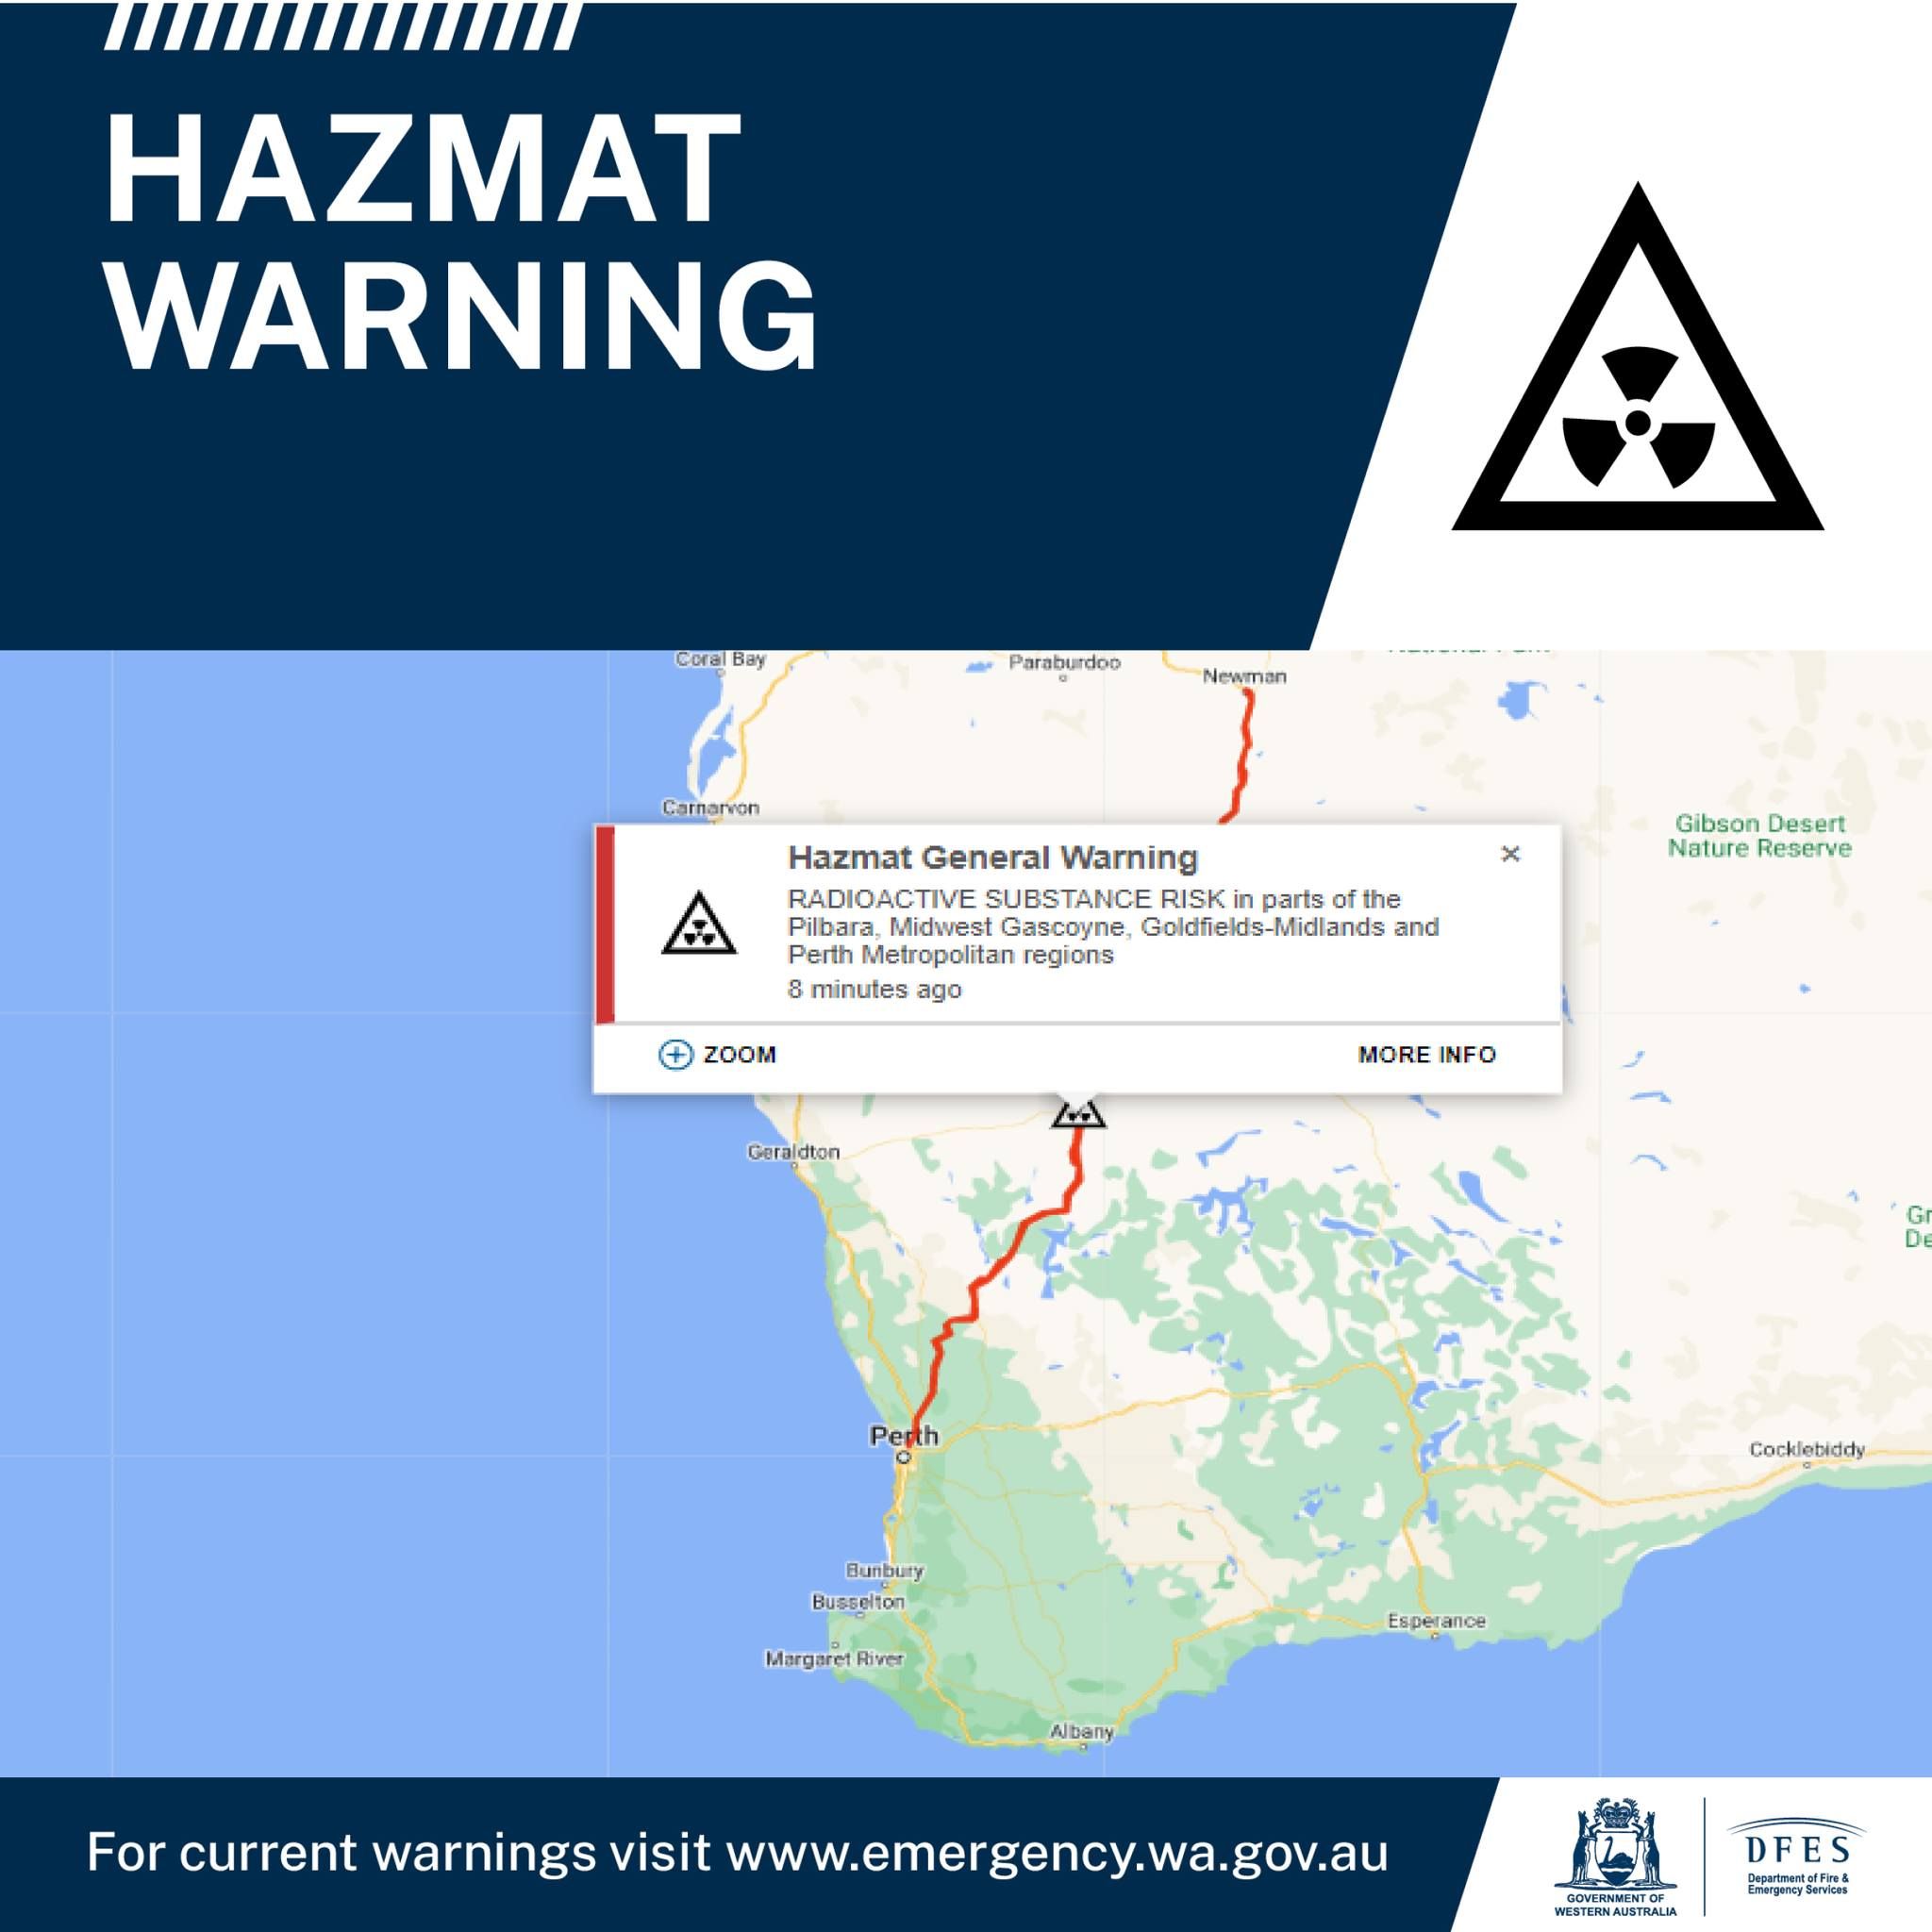 An image showing parts of Western Australia affected by a radiation warning, from Newman in the Pilbara region to state capital Perth,  due to a missing radioactive capsule.